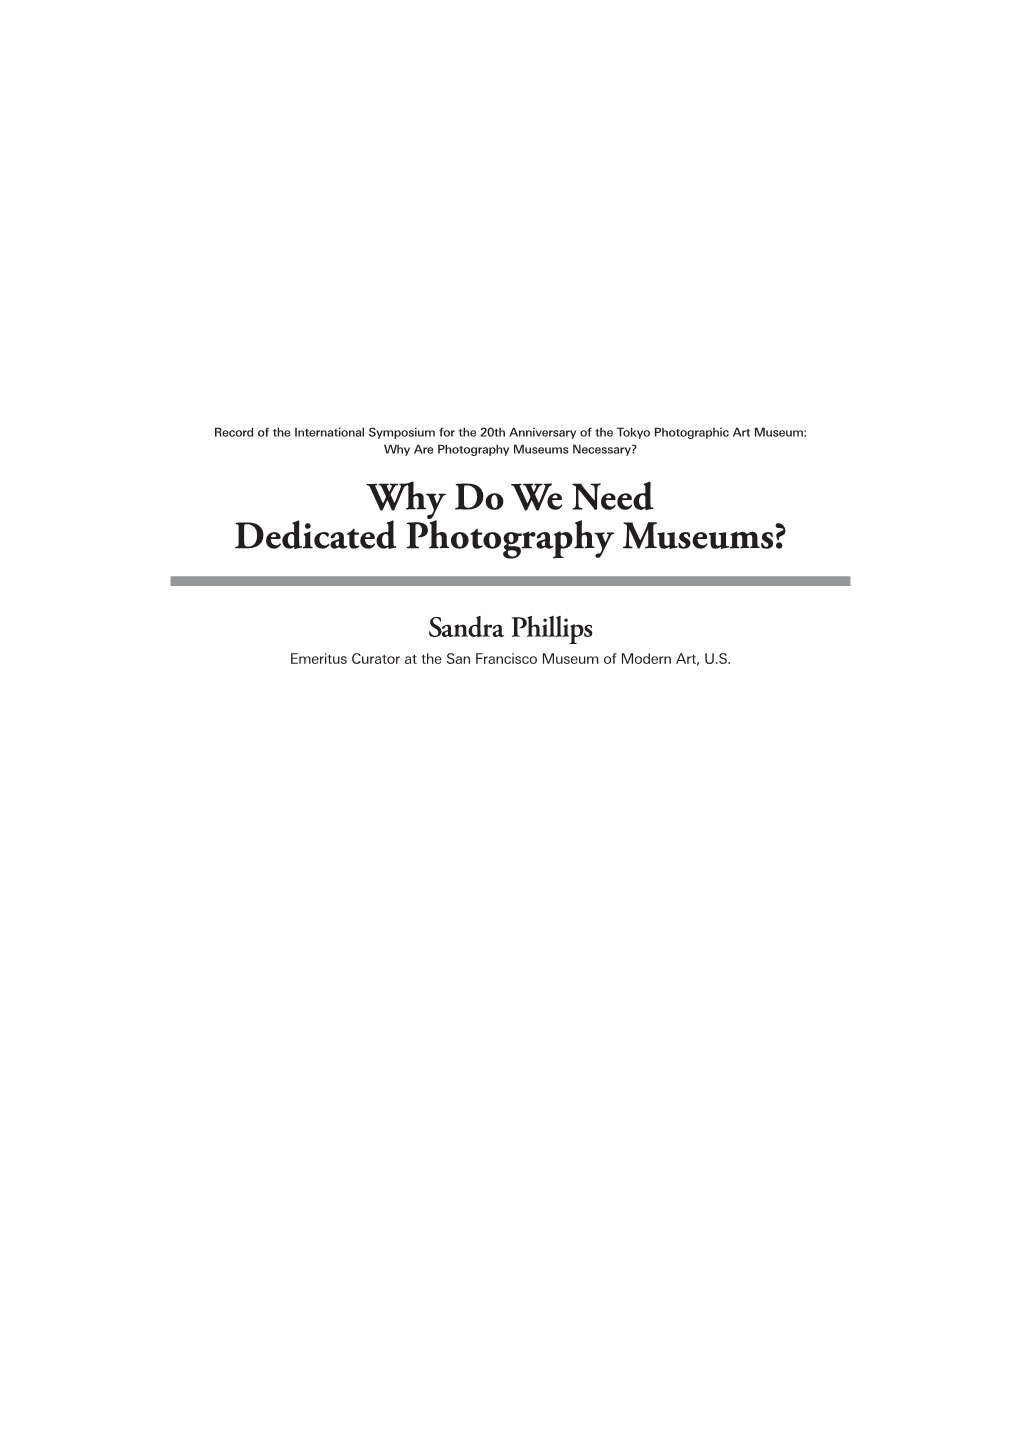 Why Do We Need Dedicated Photography Museums?